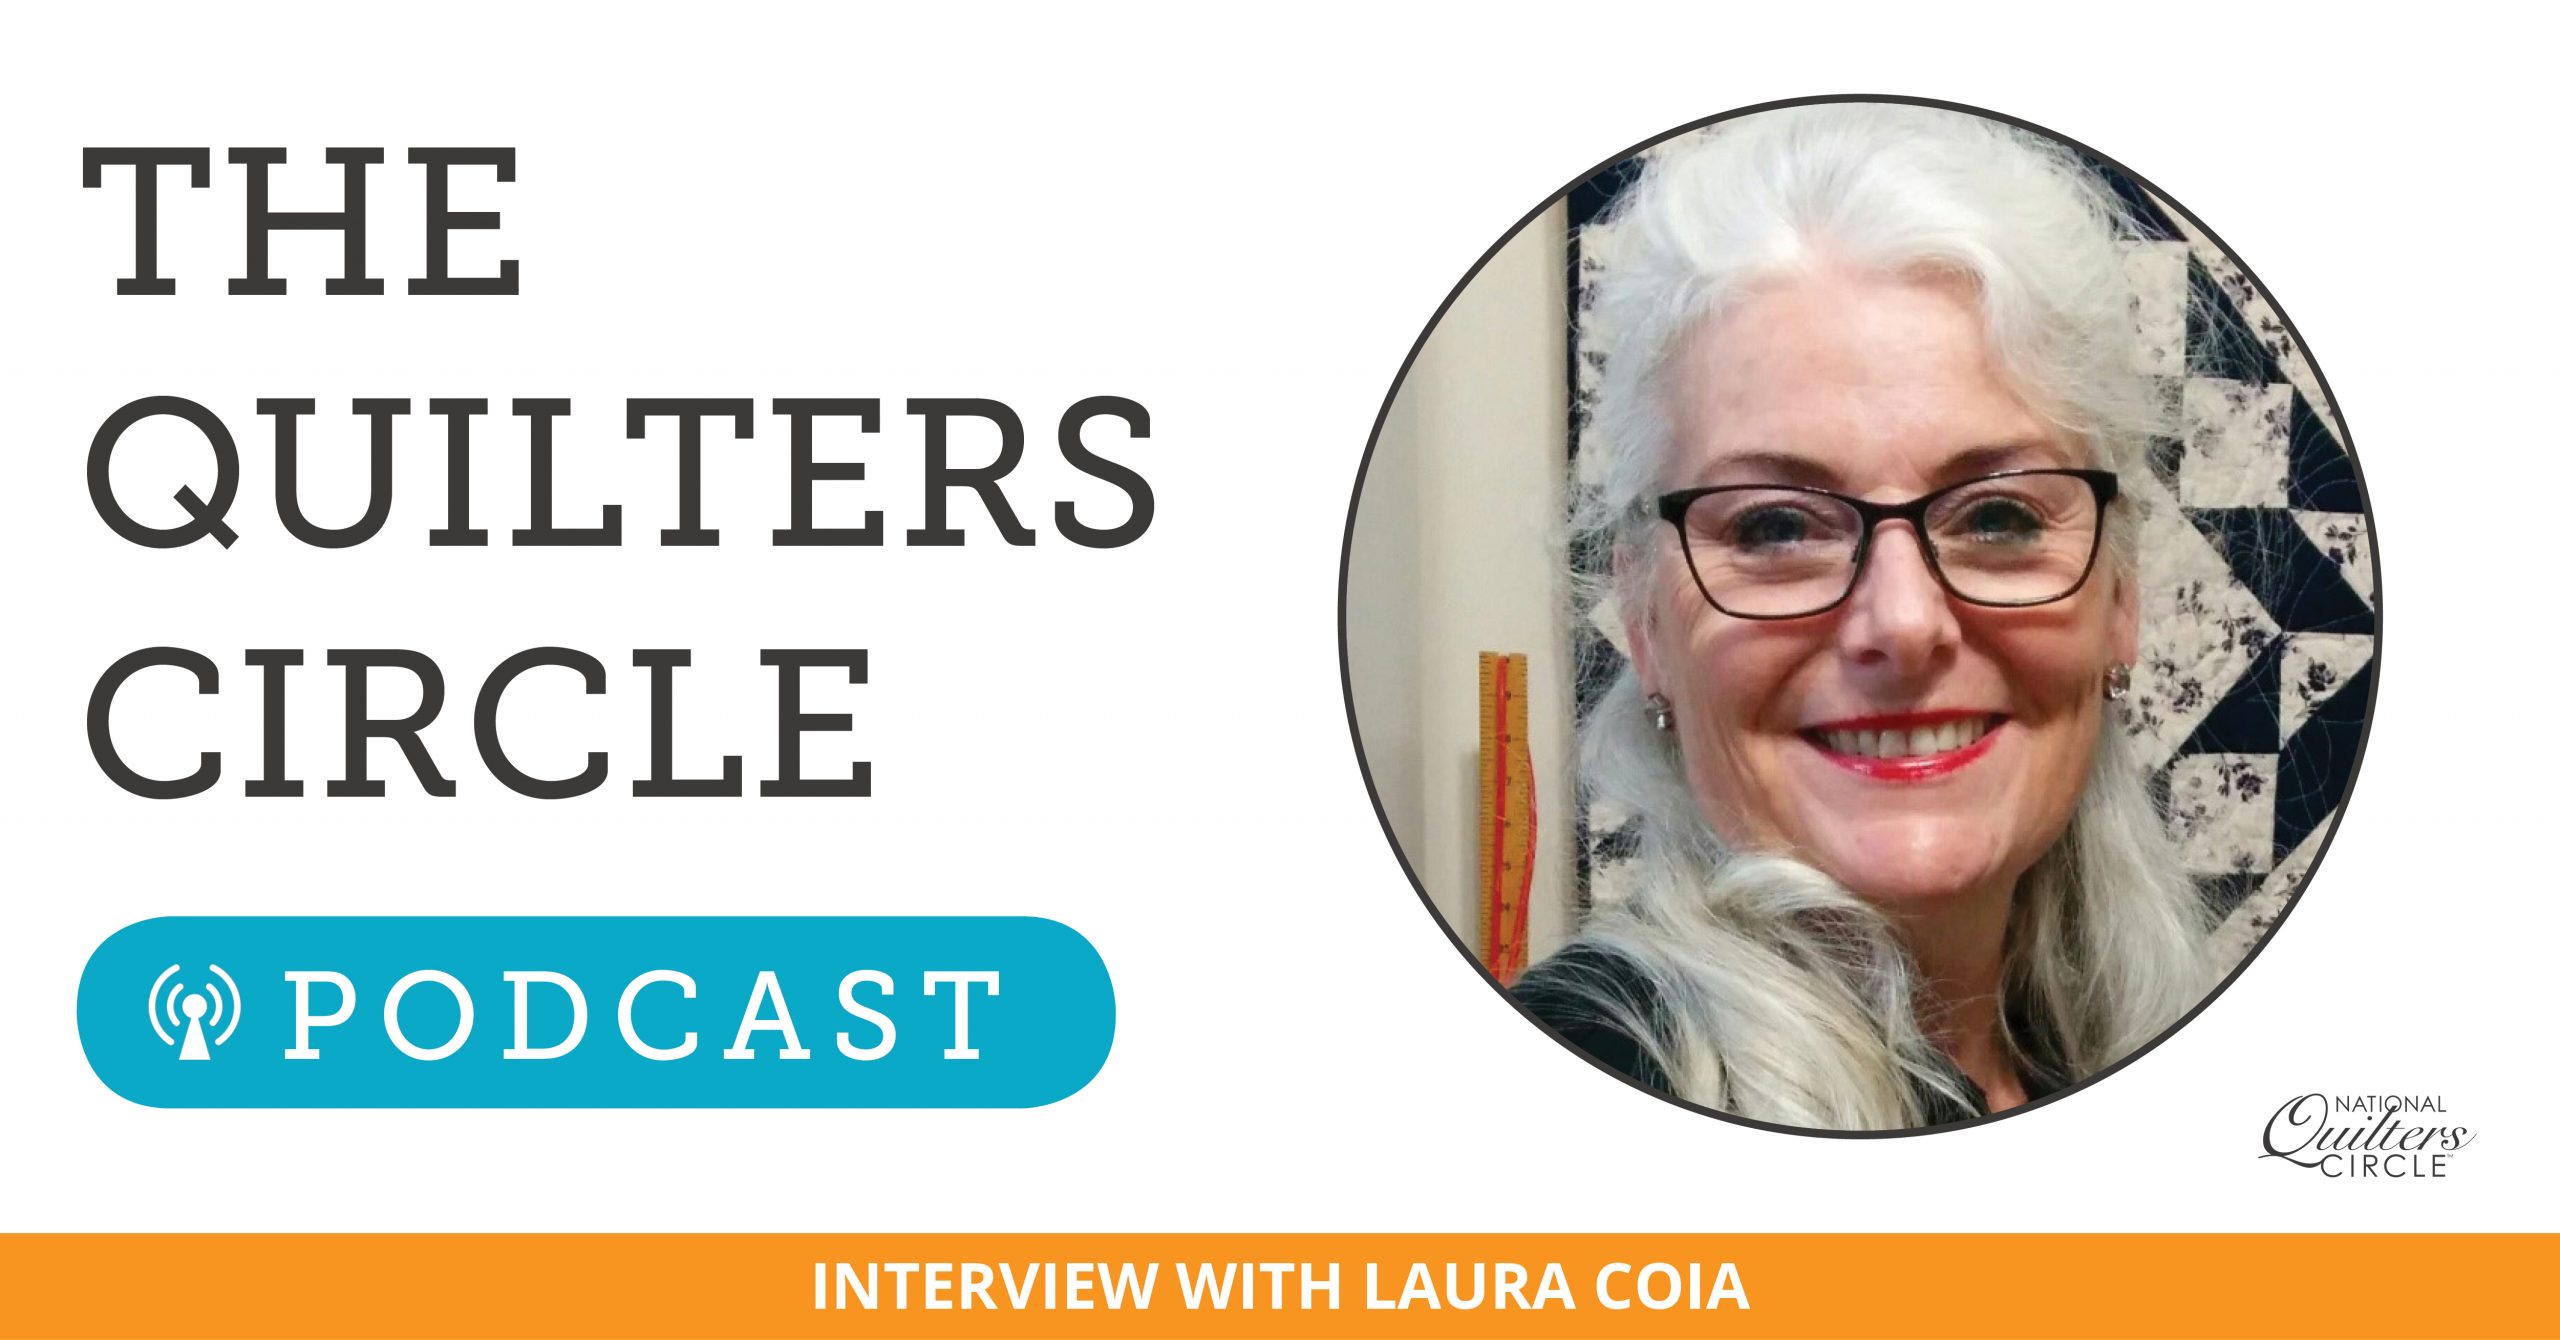 The quilters circle podcast text with a woman smiling